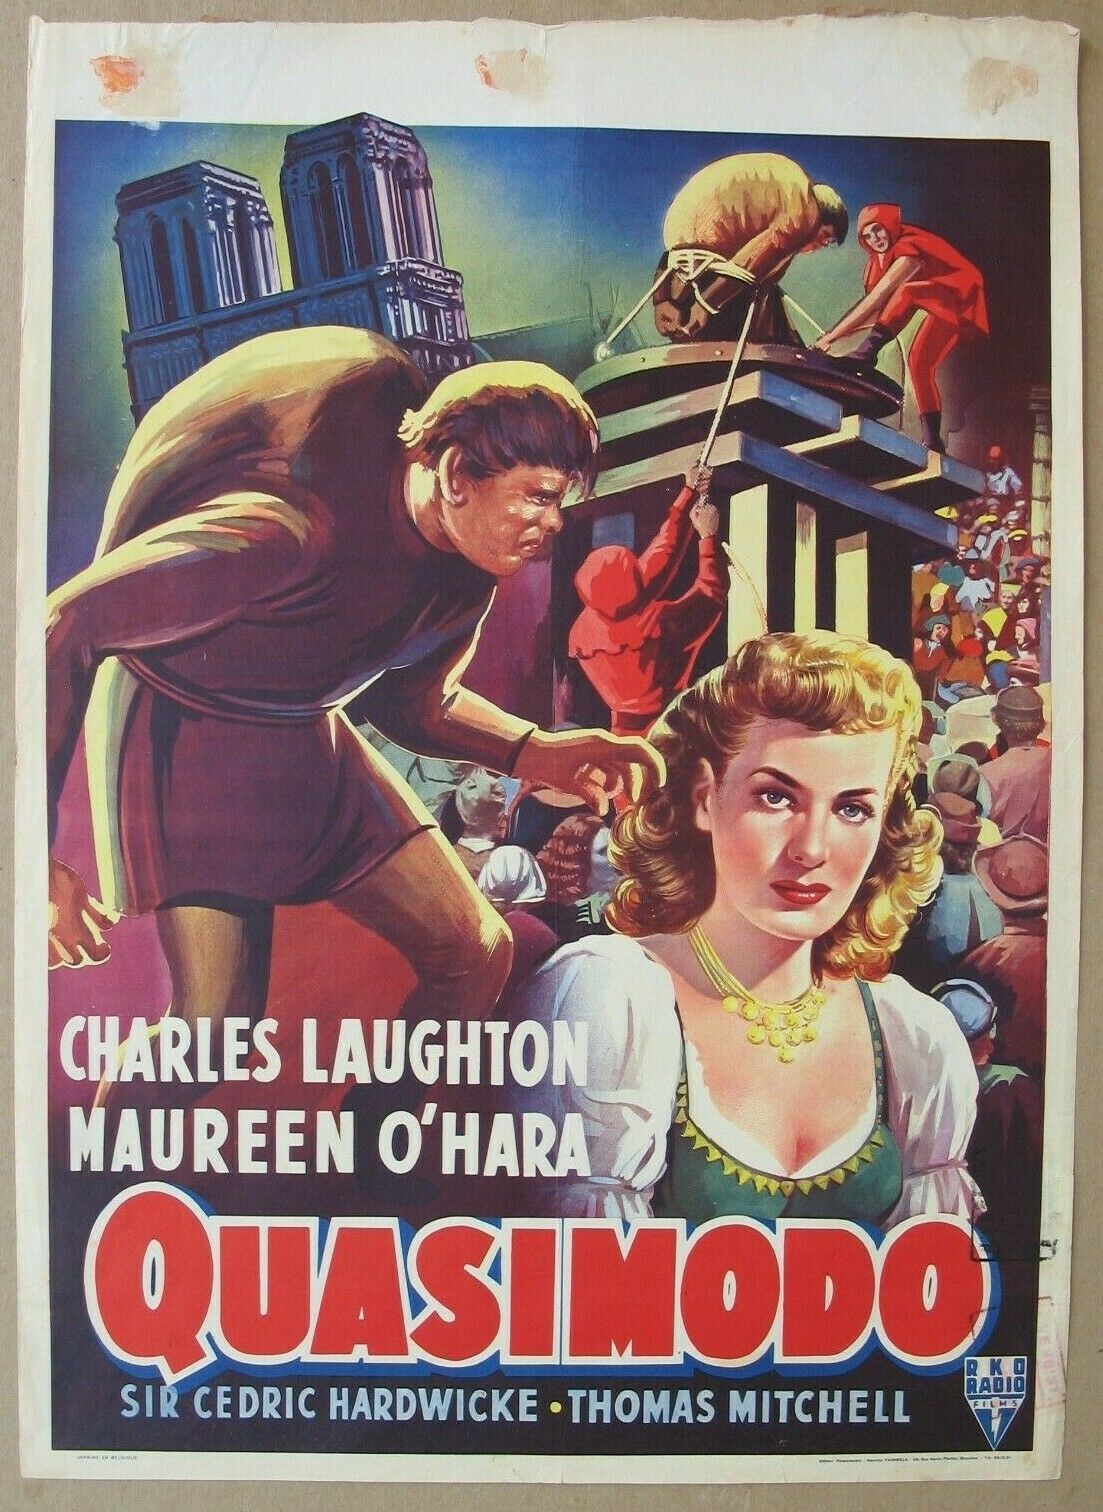 Hunchback Of Notre Dame (1939) Re-release 50's Belgian Poster, Laughton, O'hara